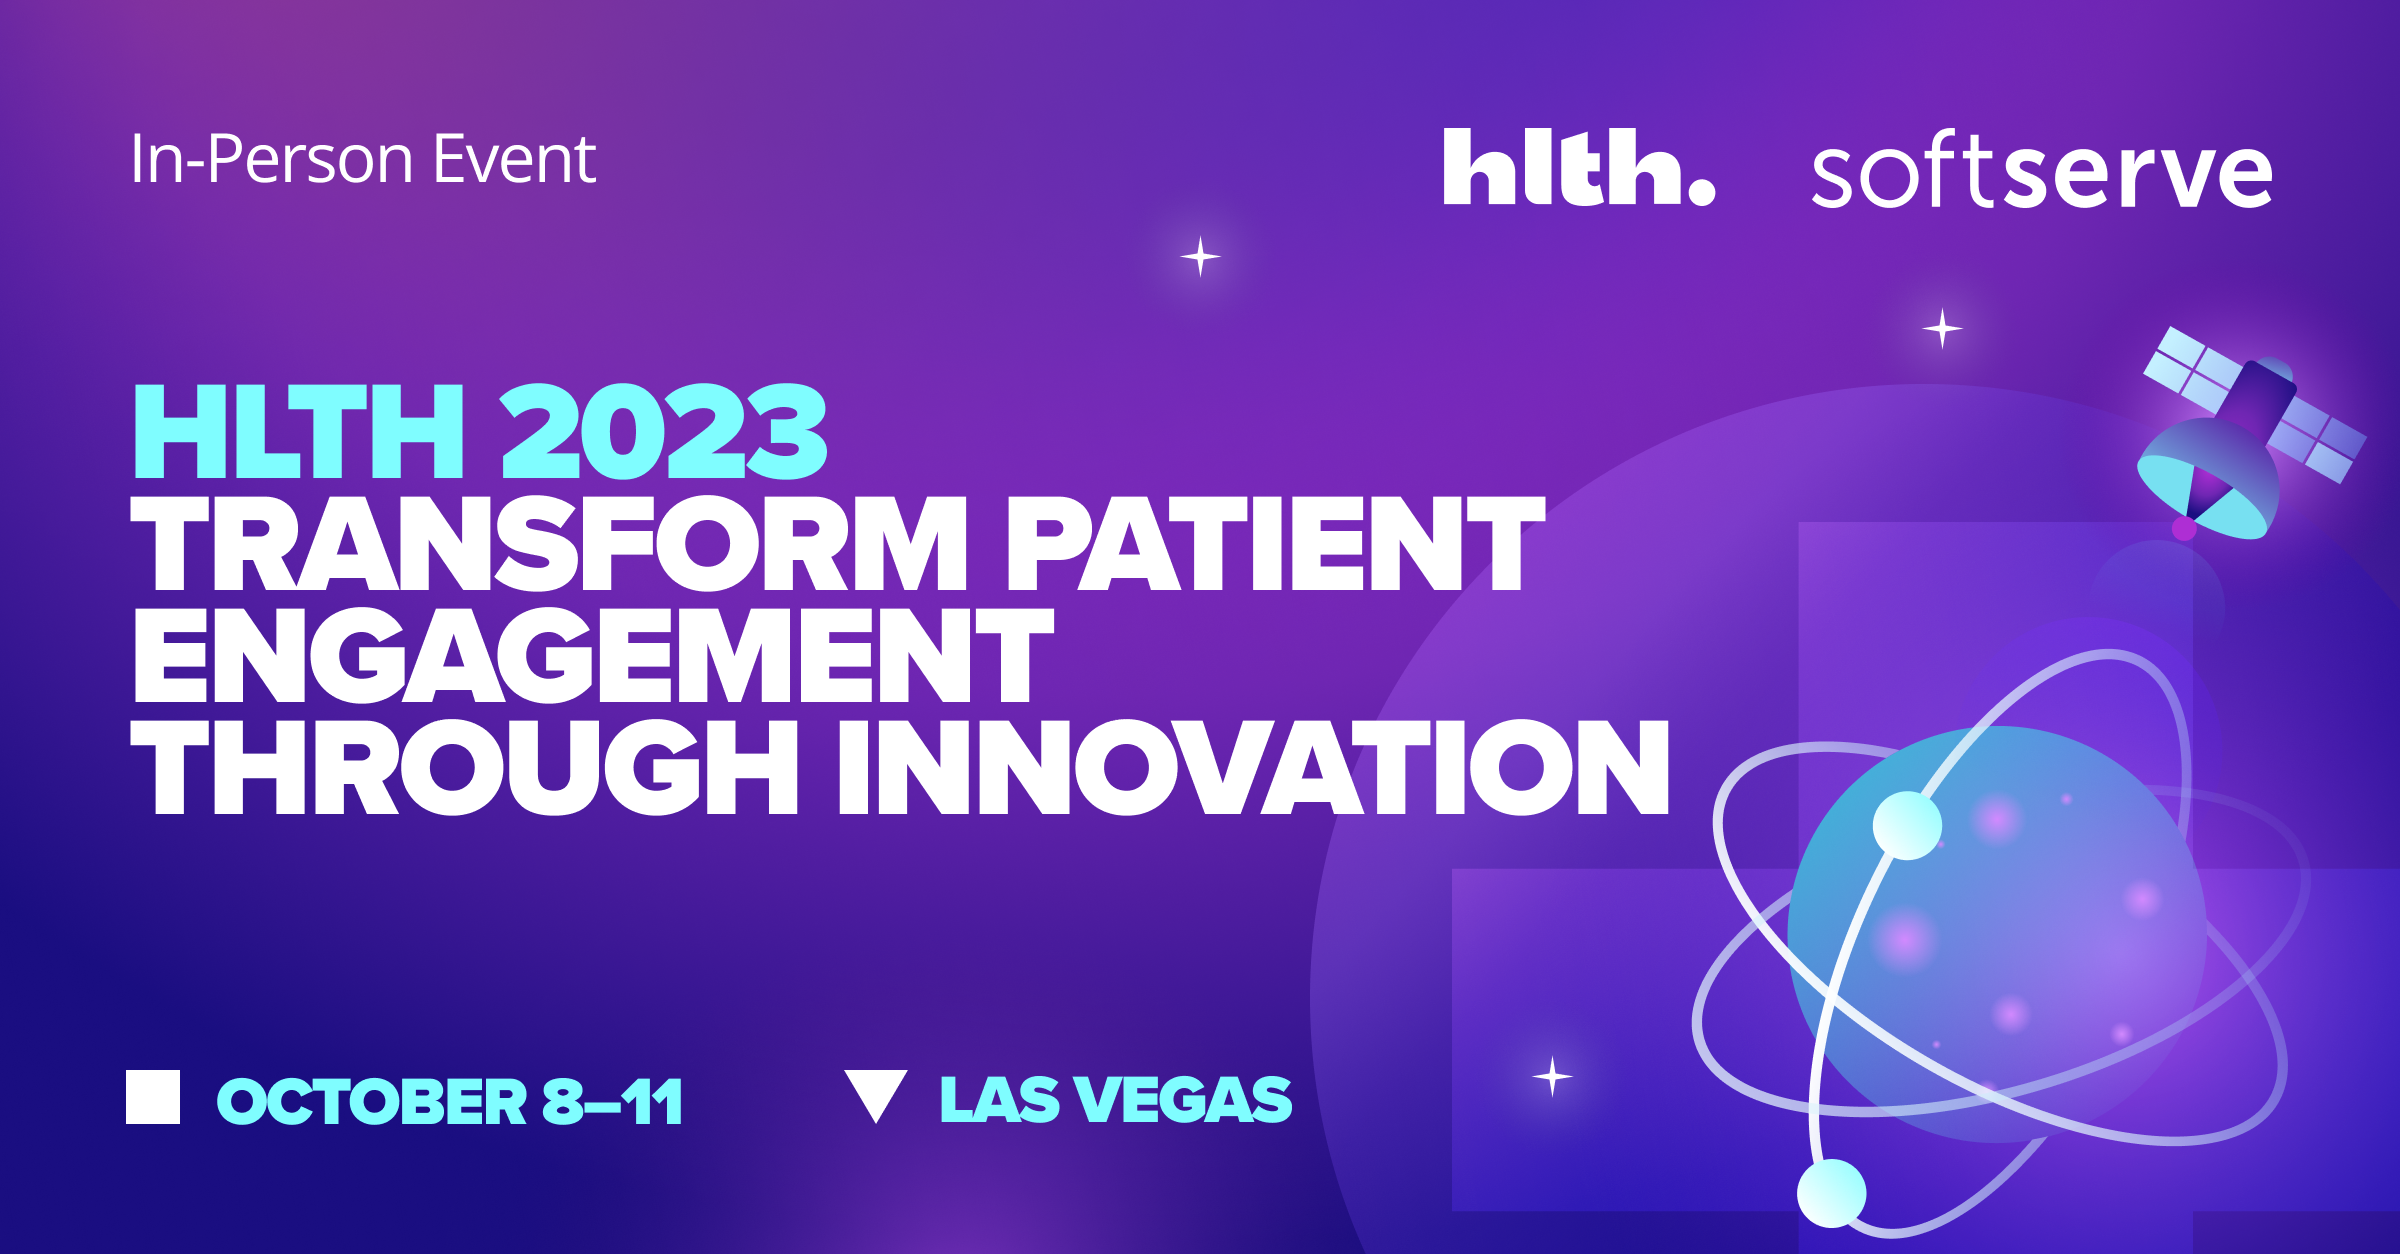 SoftServe is a Proud Sponsor of HLTH 2023